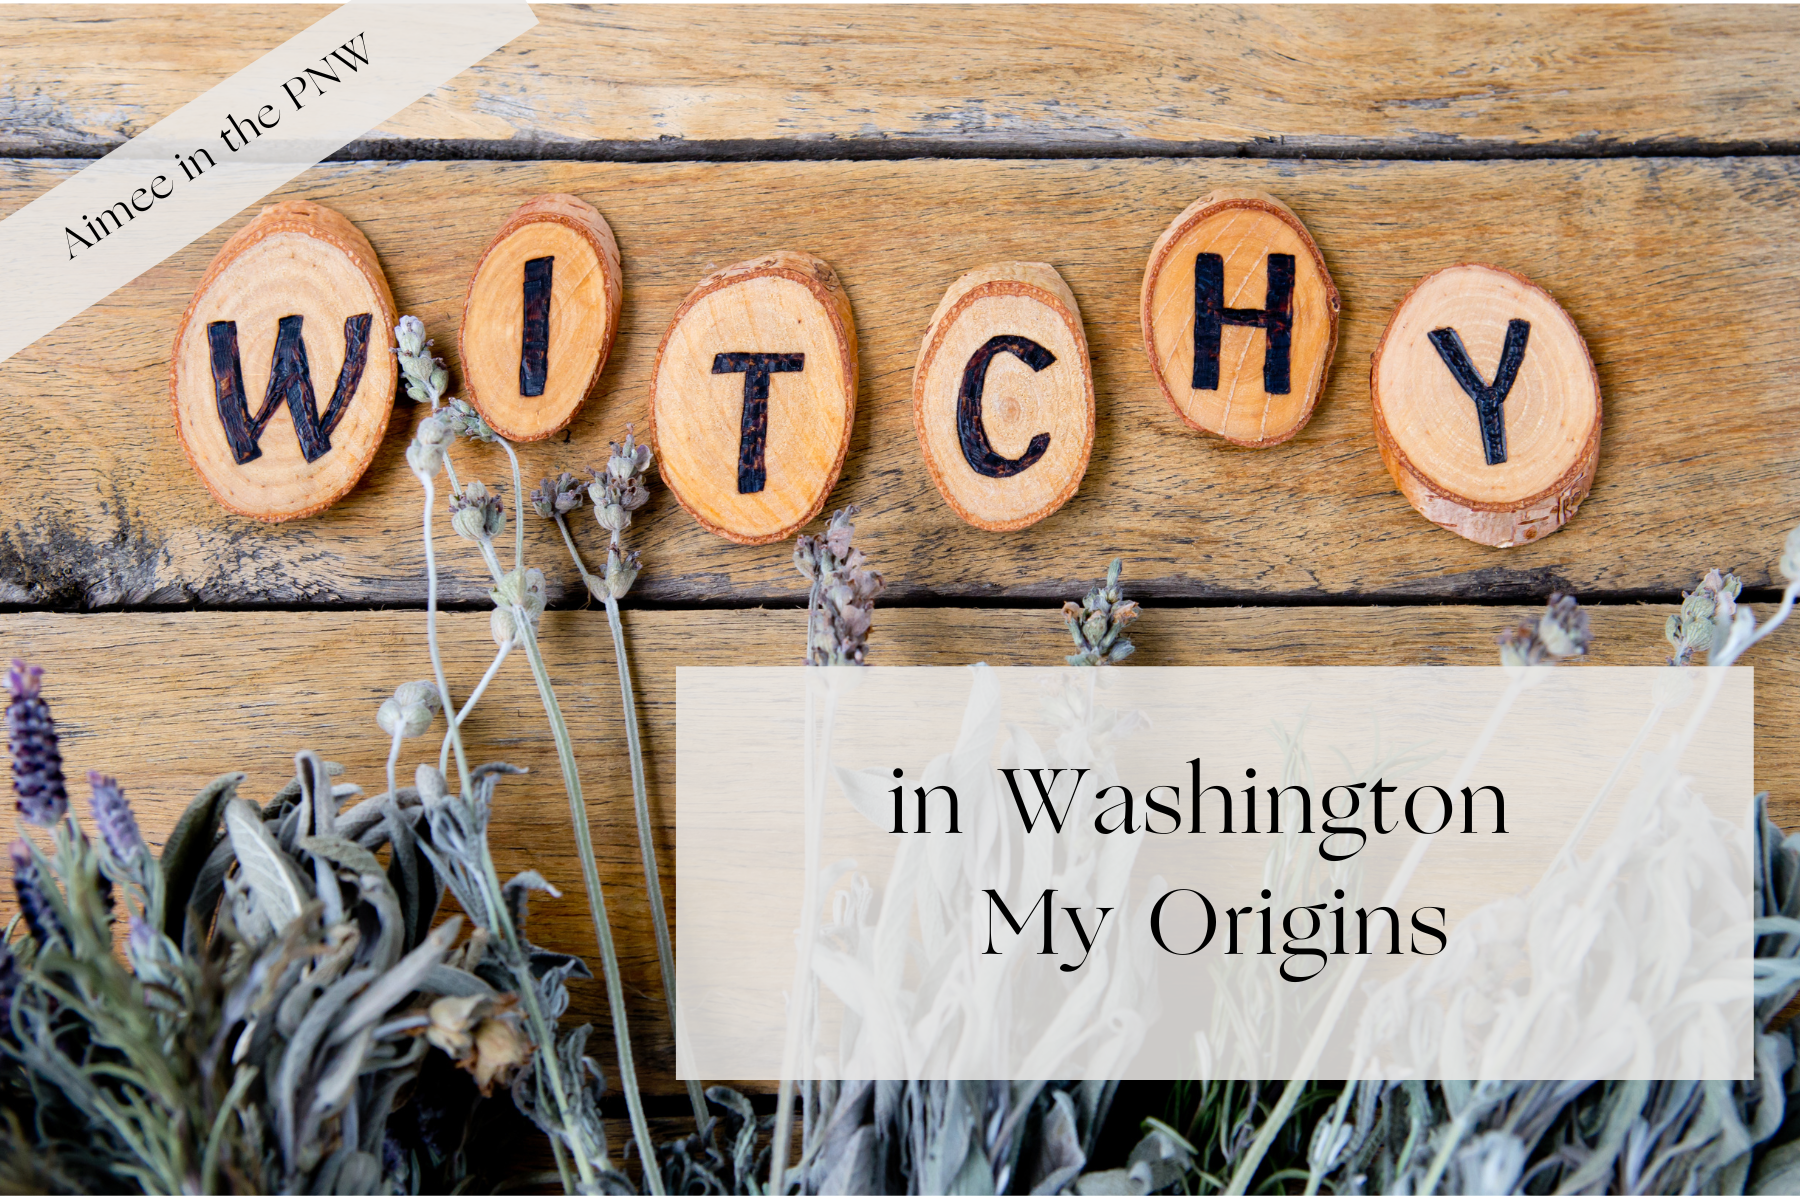 Witchy in Washington - from Aimee in the PNW